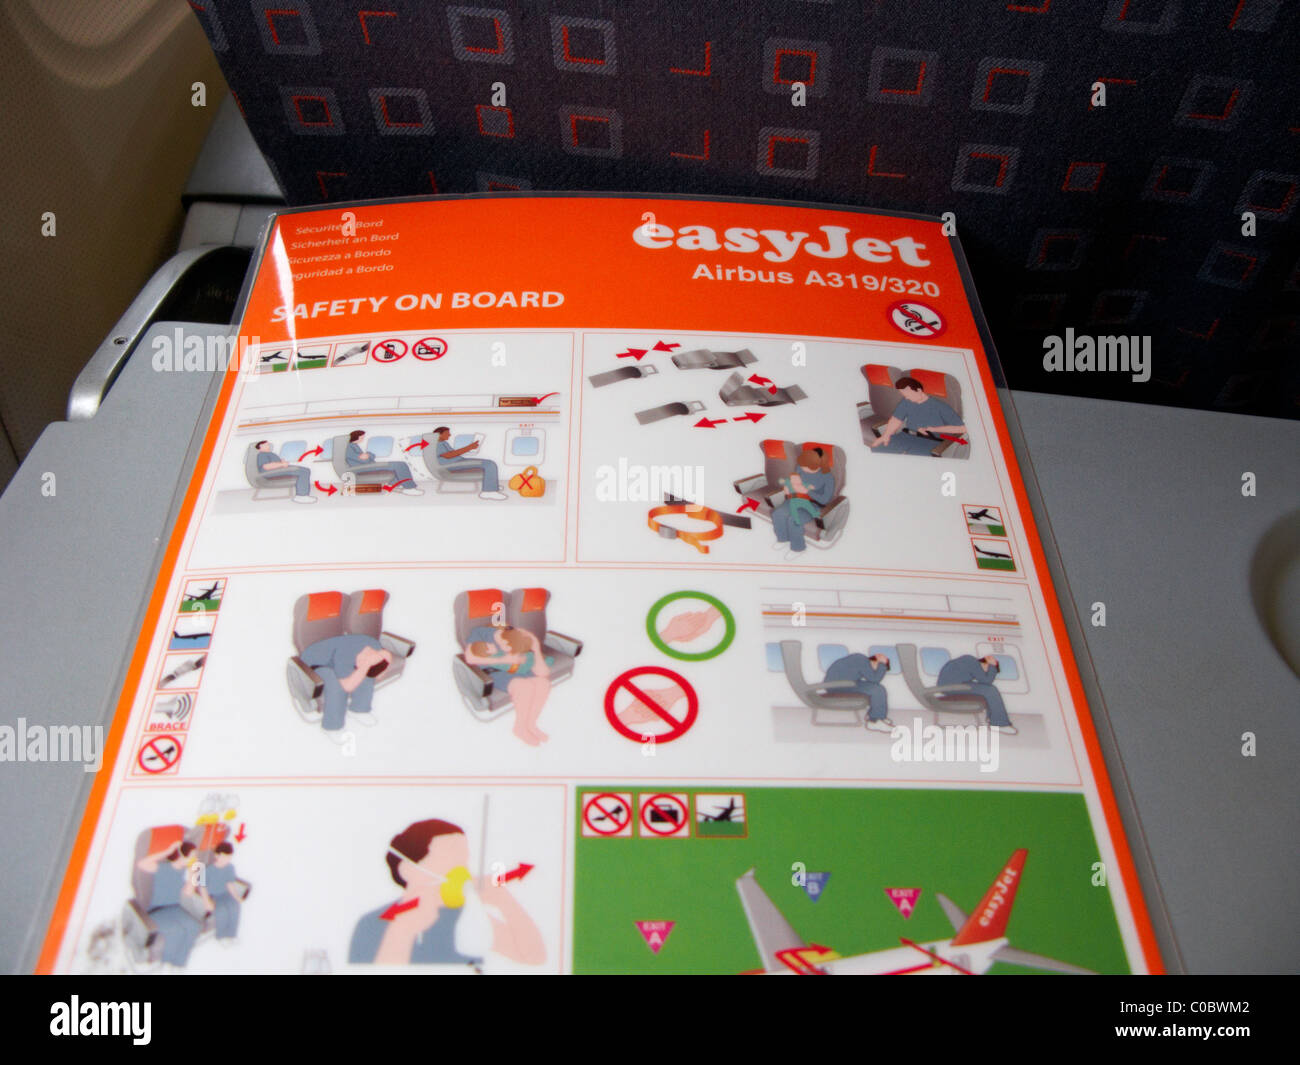 easyjet a319 airbus aircraft safety on board card Stock Photo